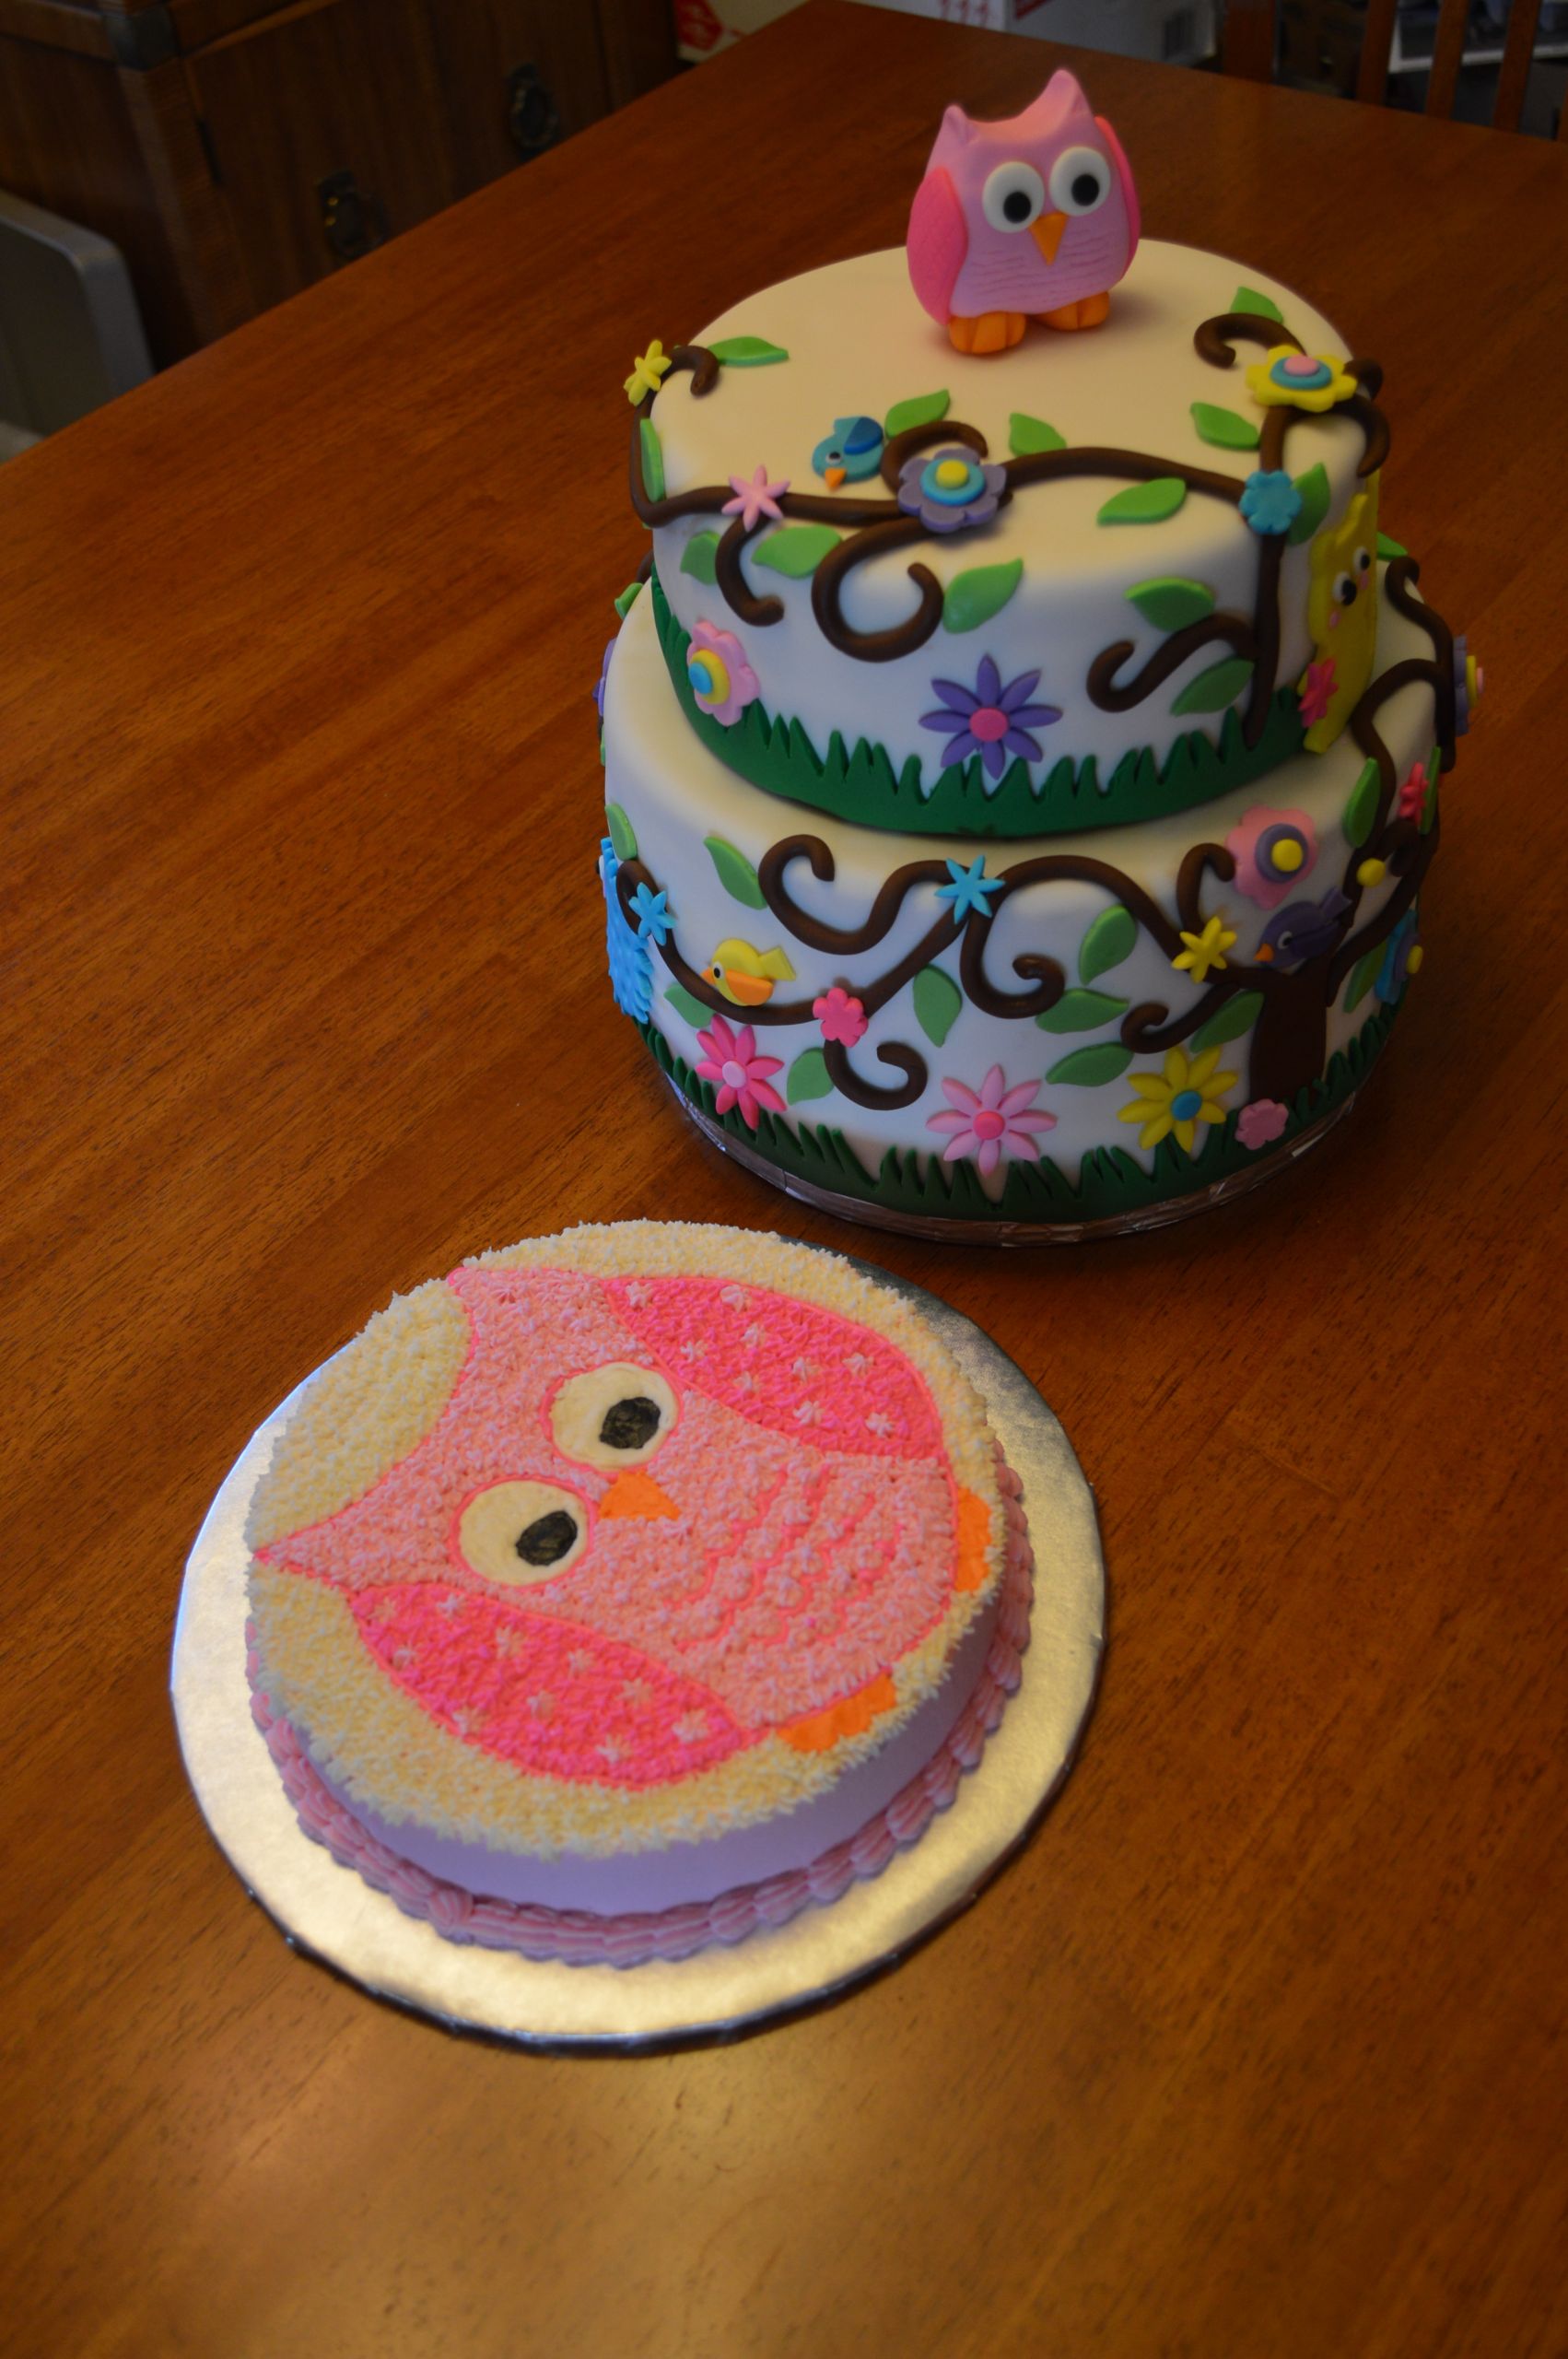 Owl Birthday Cakes
 Owl Birthday Cakes – A Little of This and a Little of That